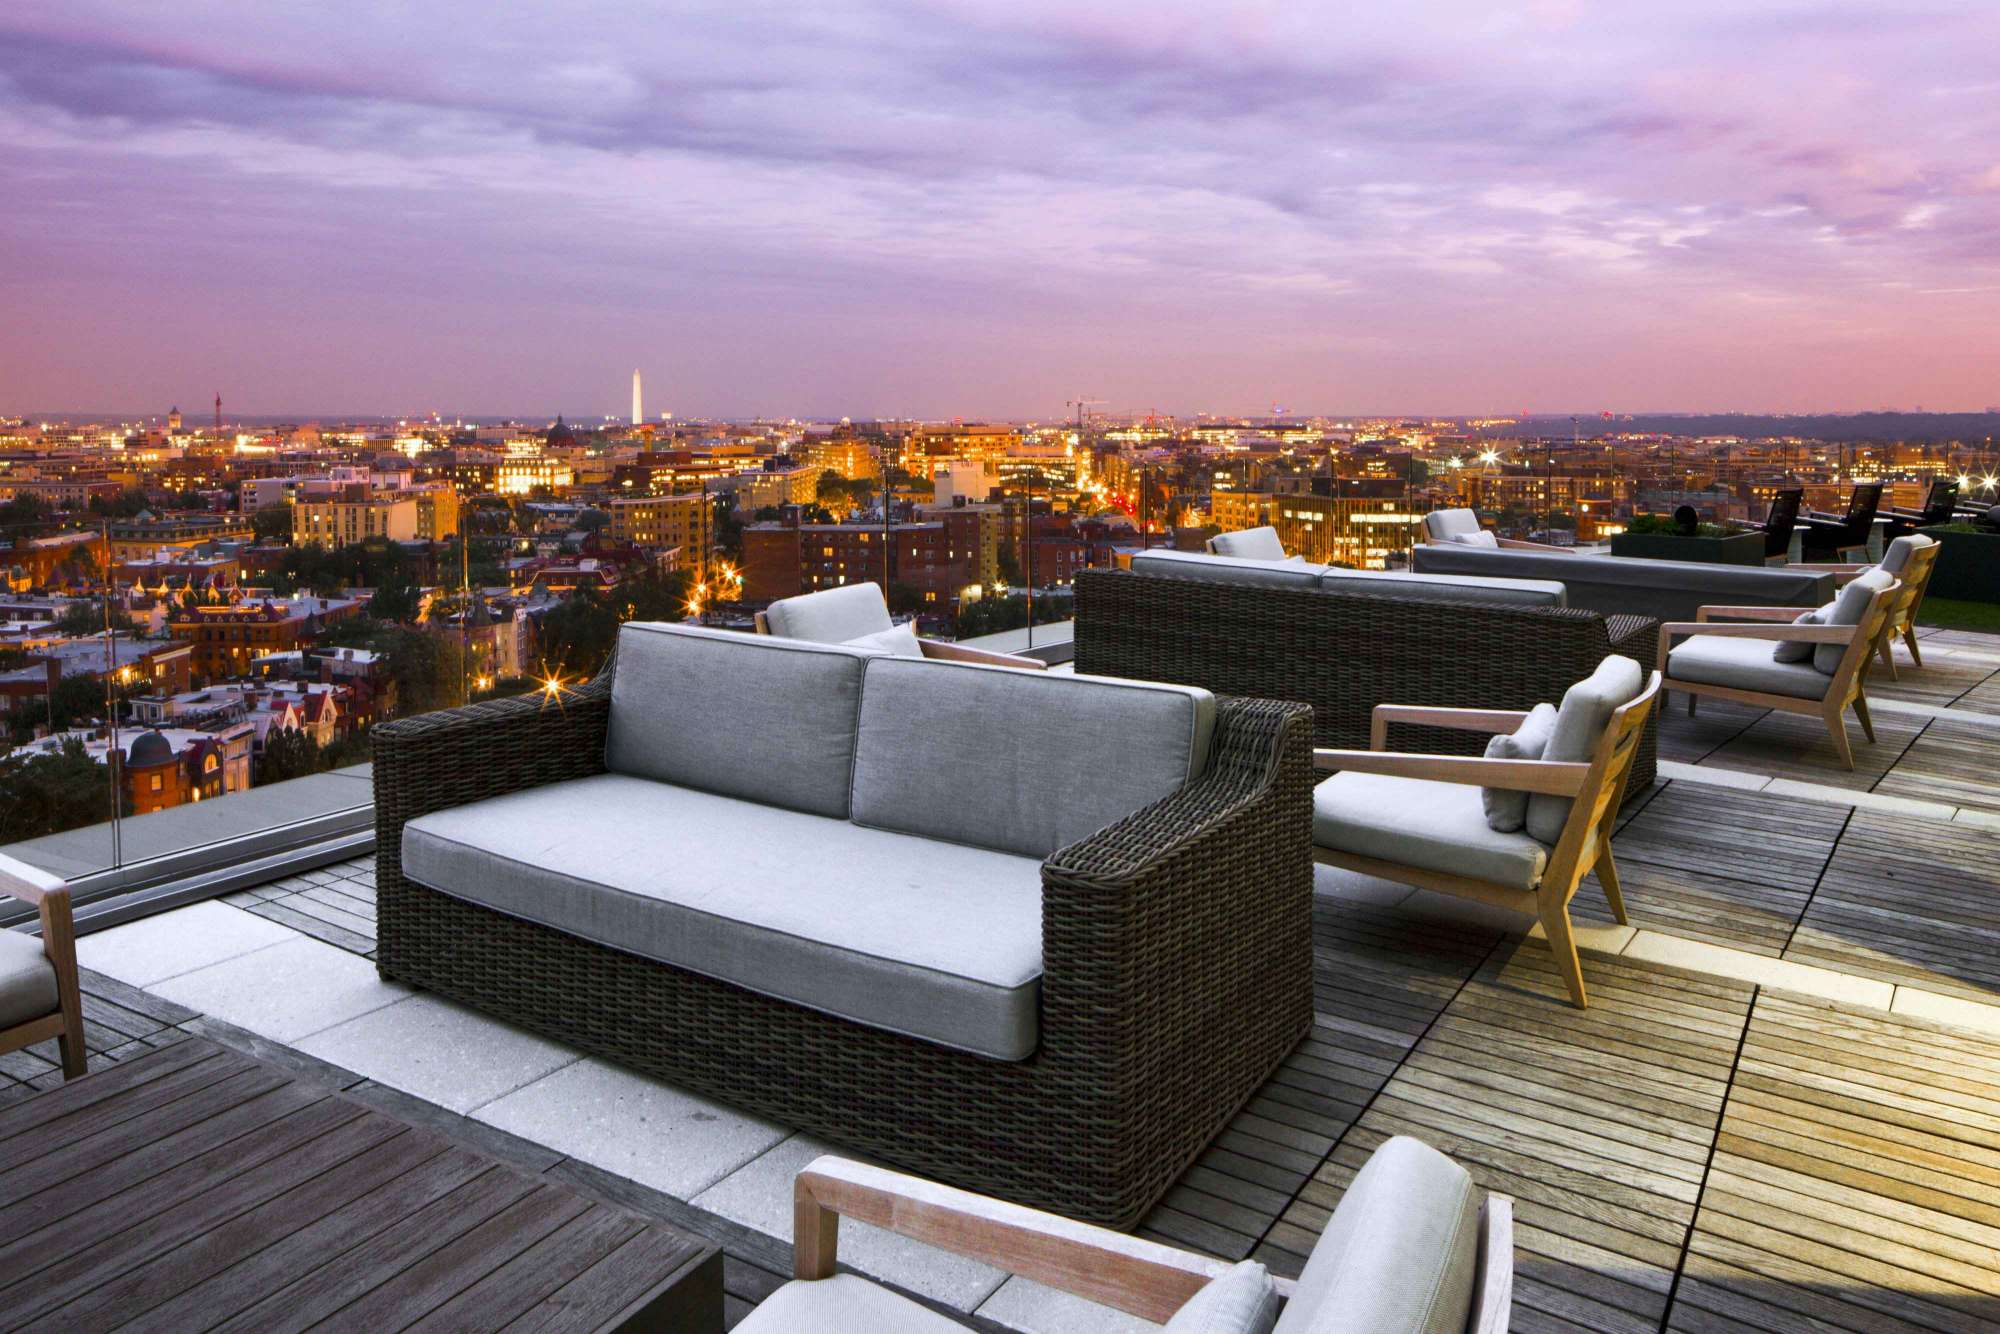 The Hepburn : Complete your days serenity with our stunning, rooftop views of the city and beyond.